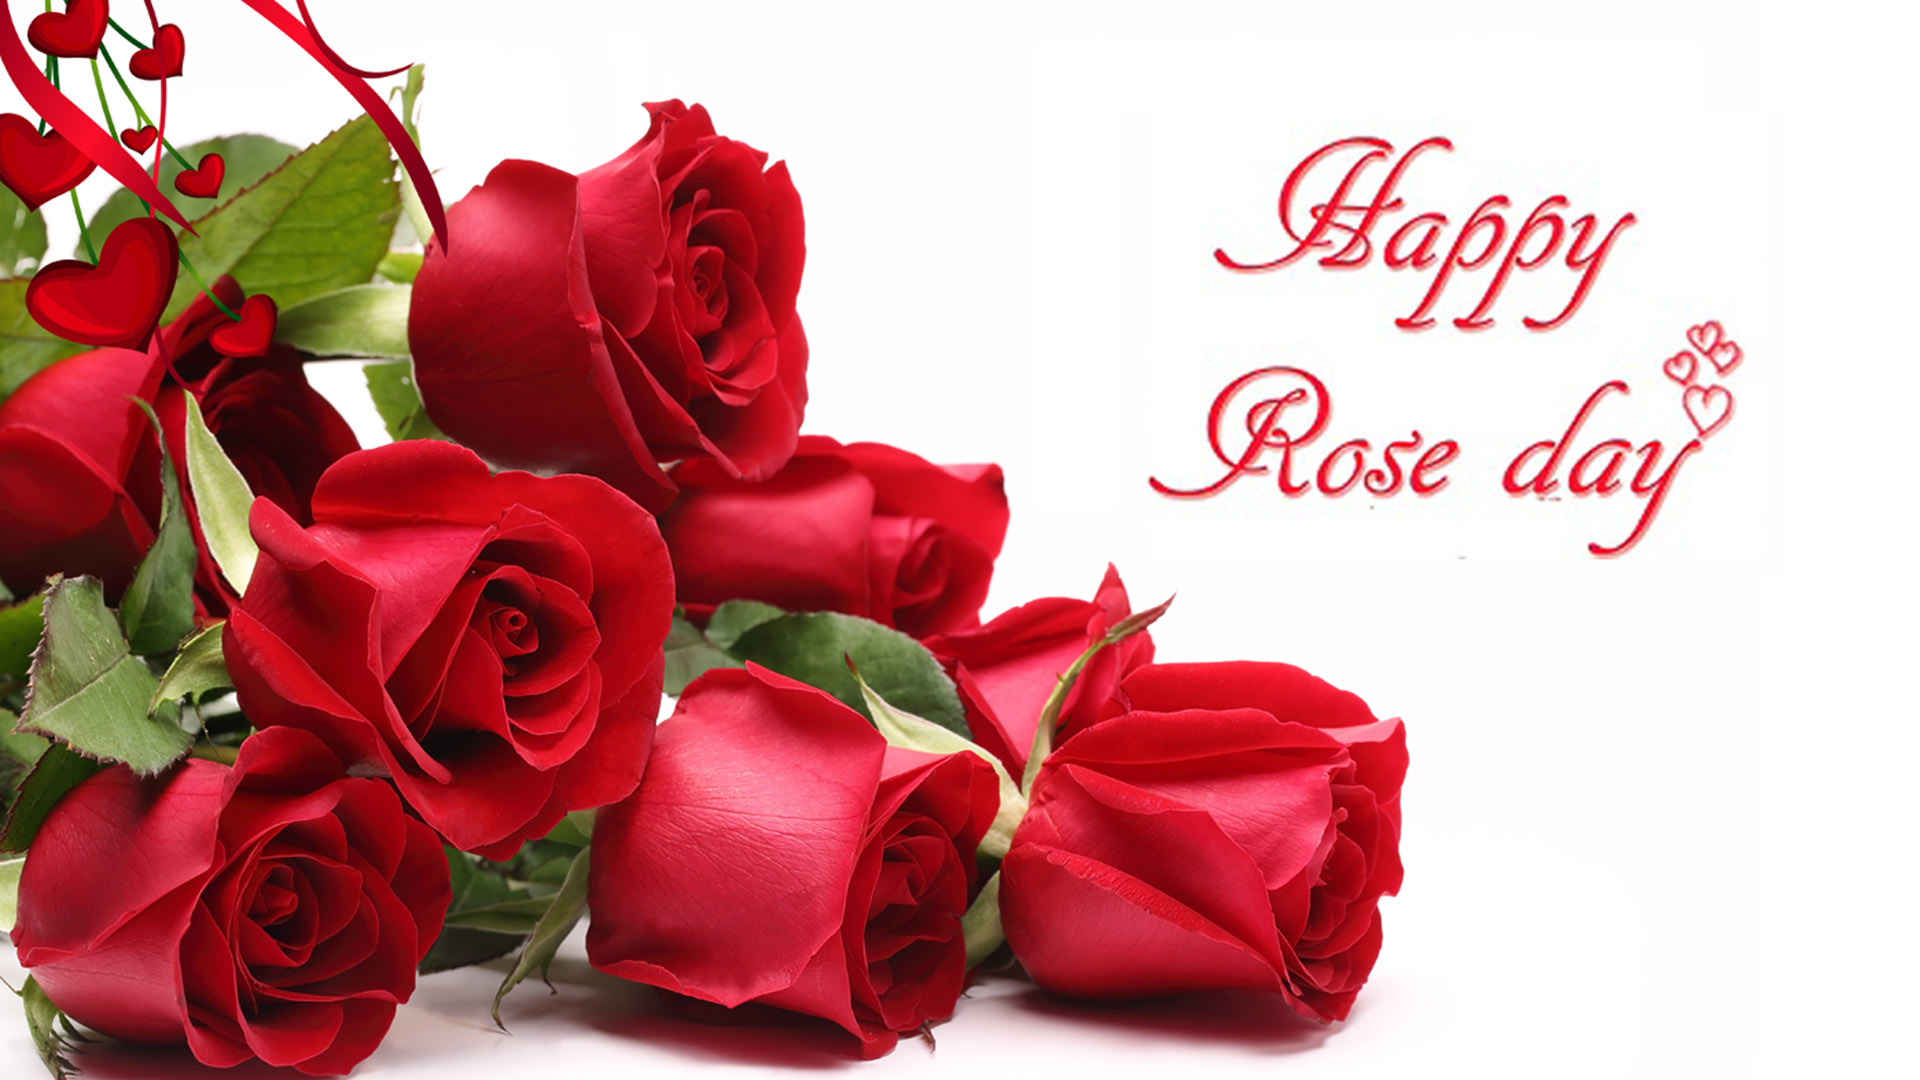 Happy Rose Day Red Rose Bouquet Greetings And Wishes Card : 